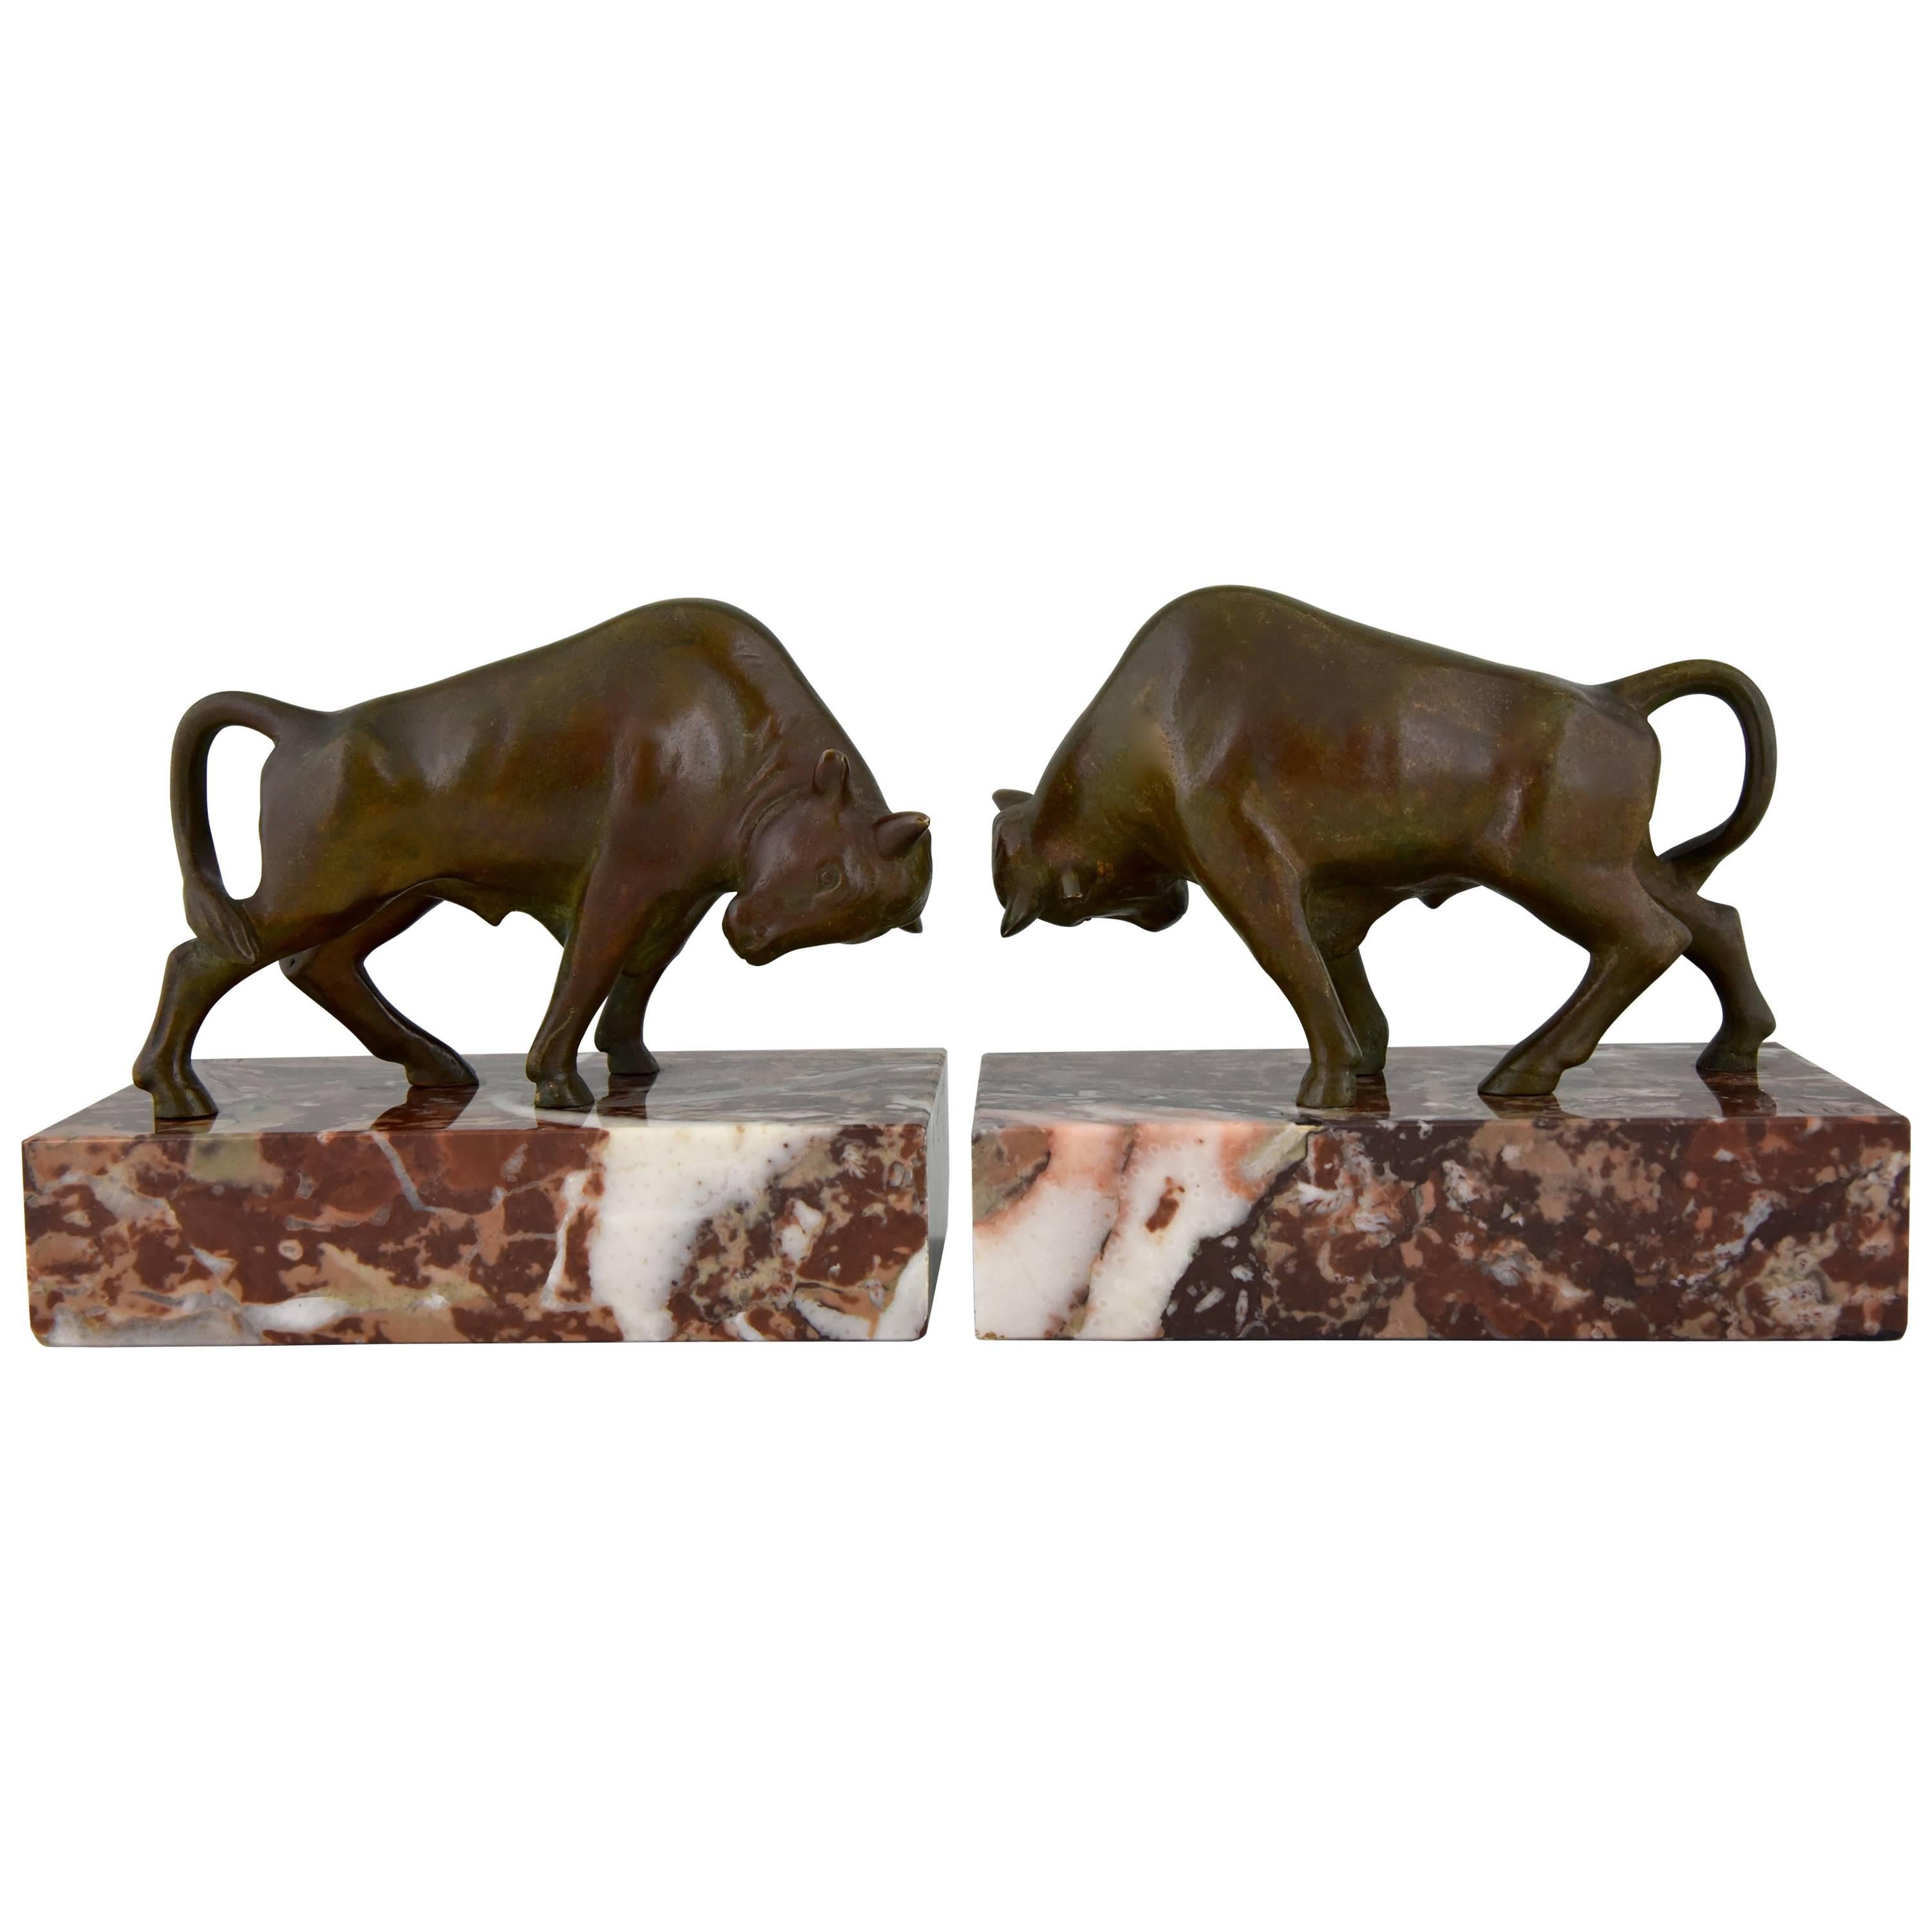 Art Deco Bronze Bull Bookends by Luc, 1930 France